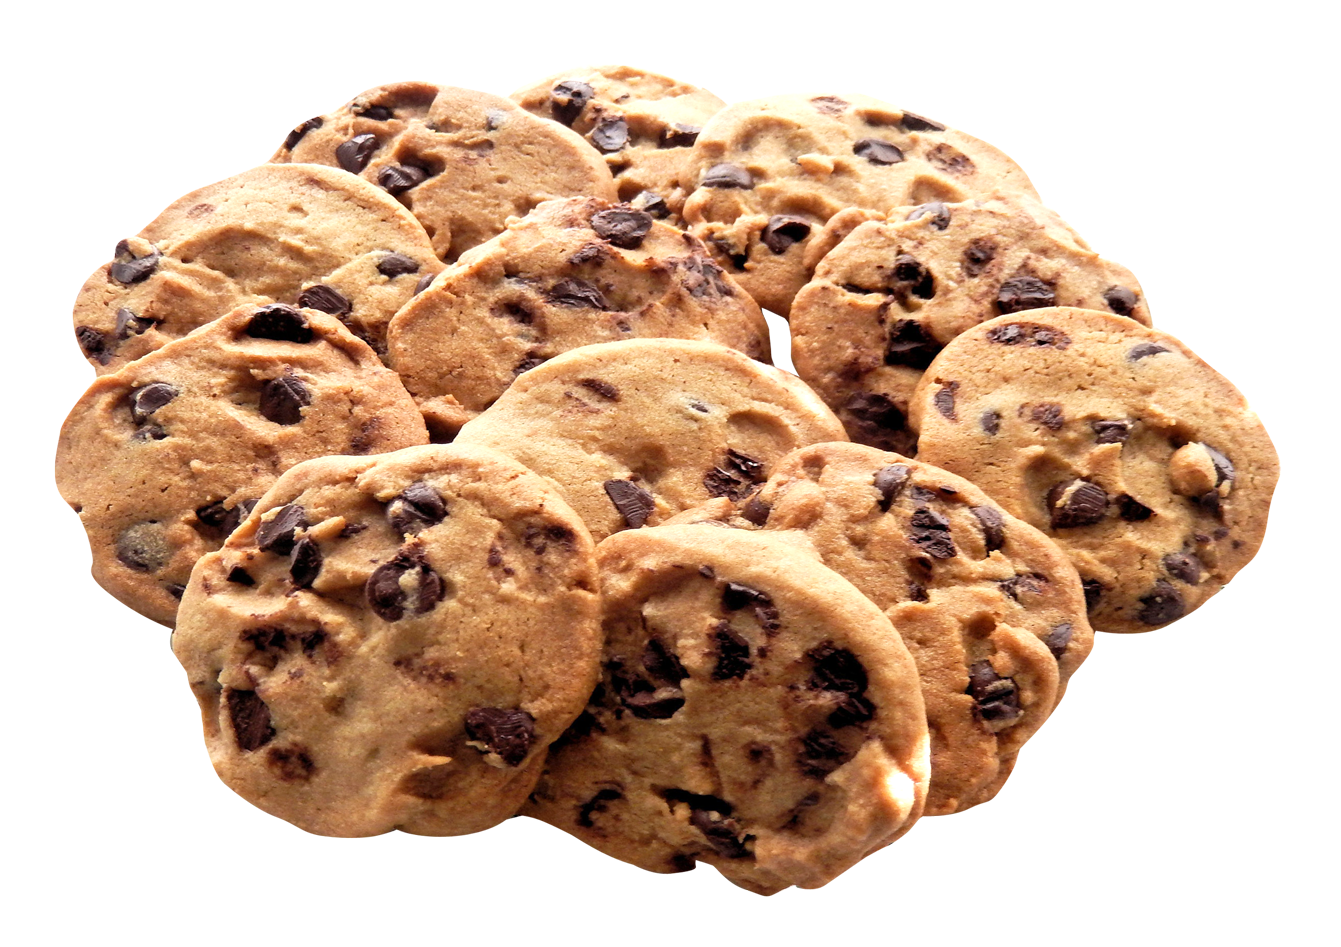 A Group Of Chocolate Chip Cookies